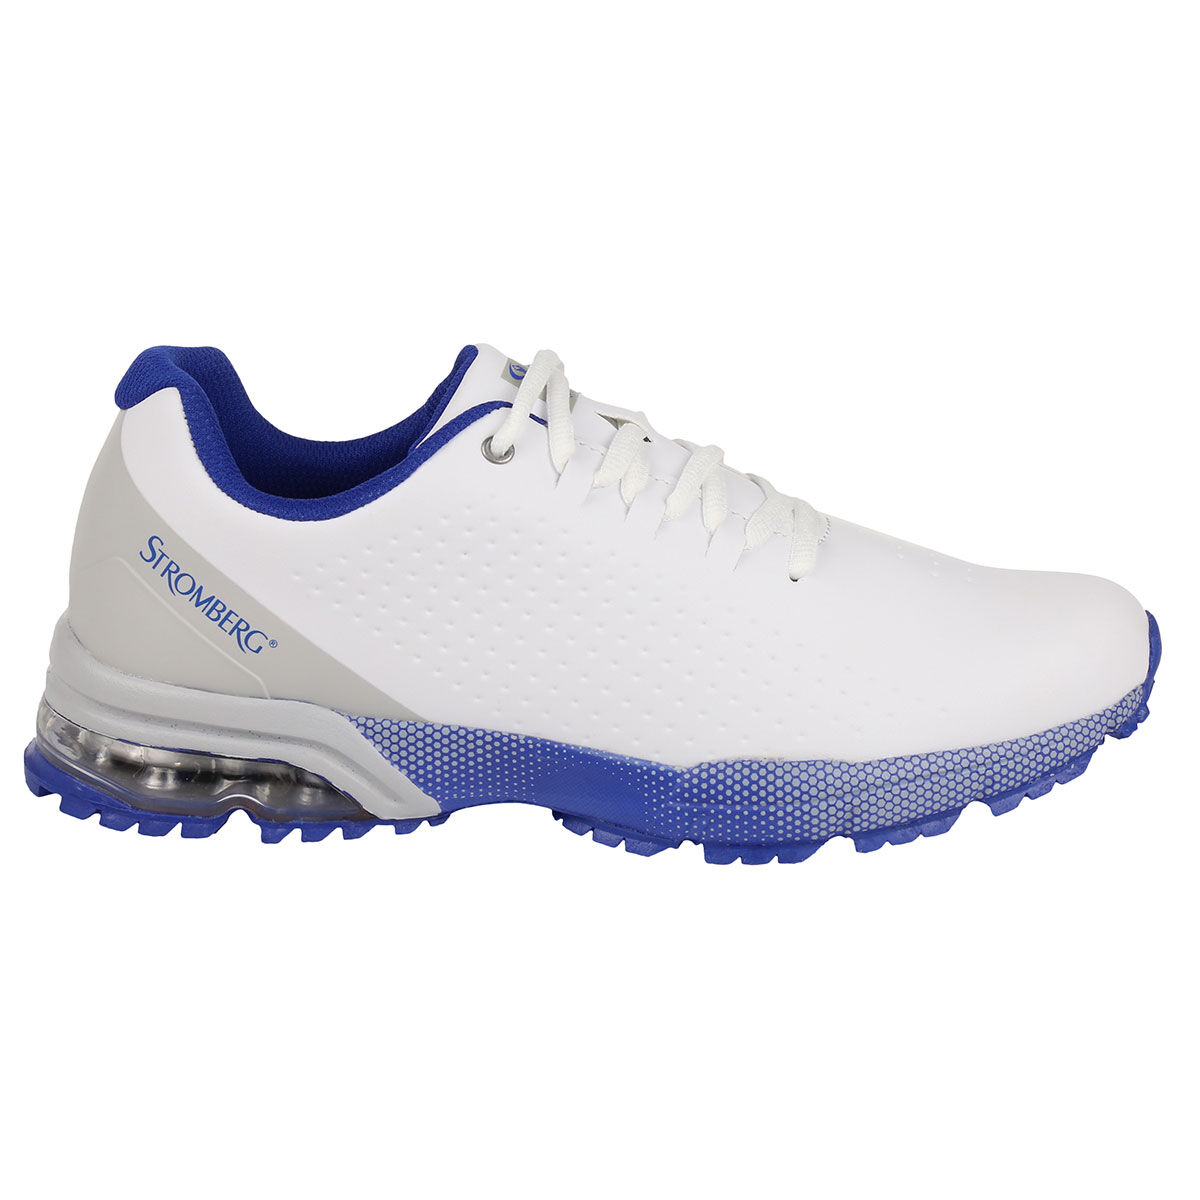 Stromberg White and Blue Waterproof Ailsa Spikeless Golf Shoes, Size: 11 | American Golf von Stromberg